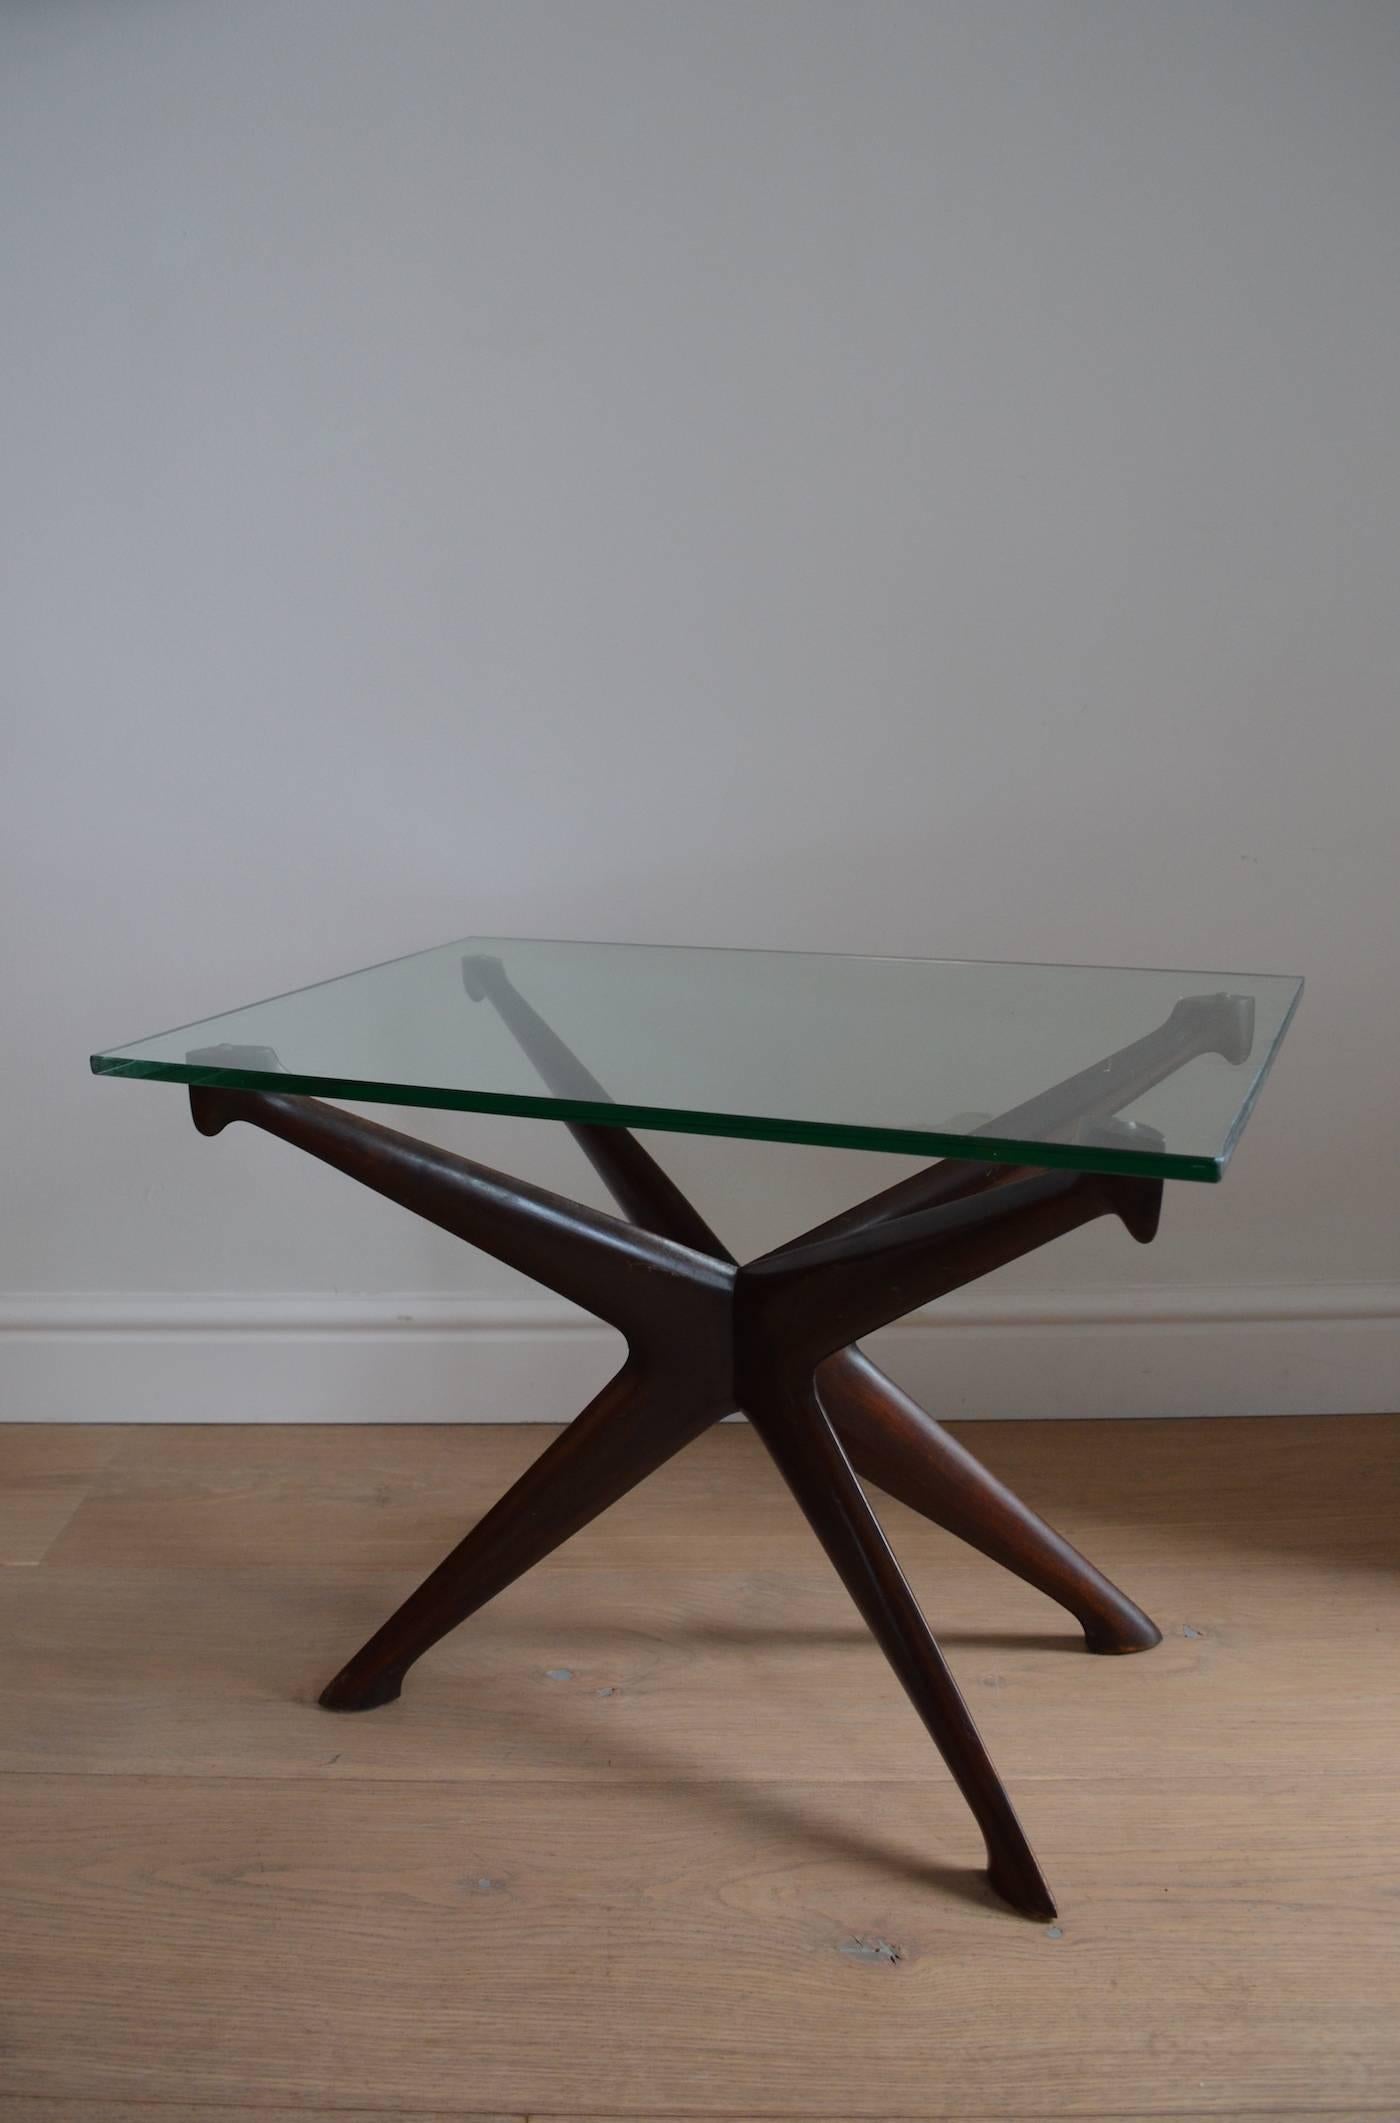 Designed by Ico Parisi for Fratelli Rizzi, this mahogany and glass side table has all the flair and design quality that you'd expect from 1950s Italian design.